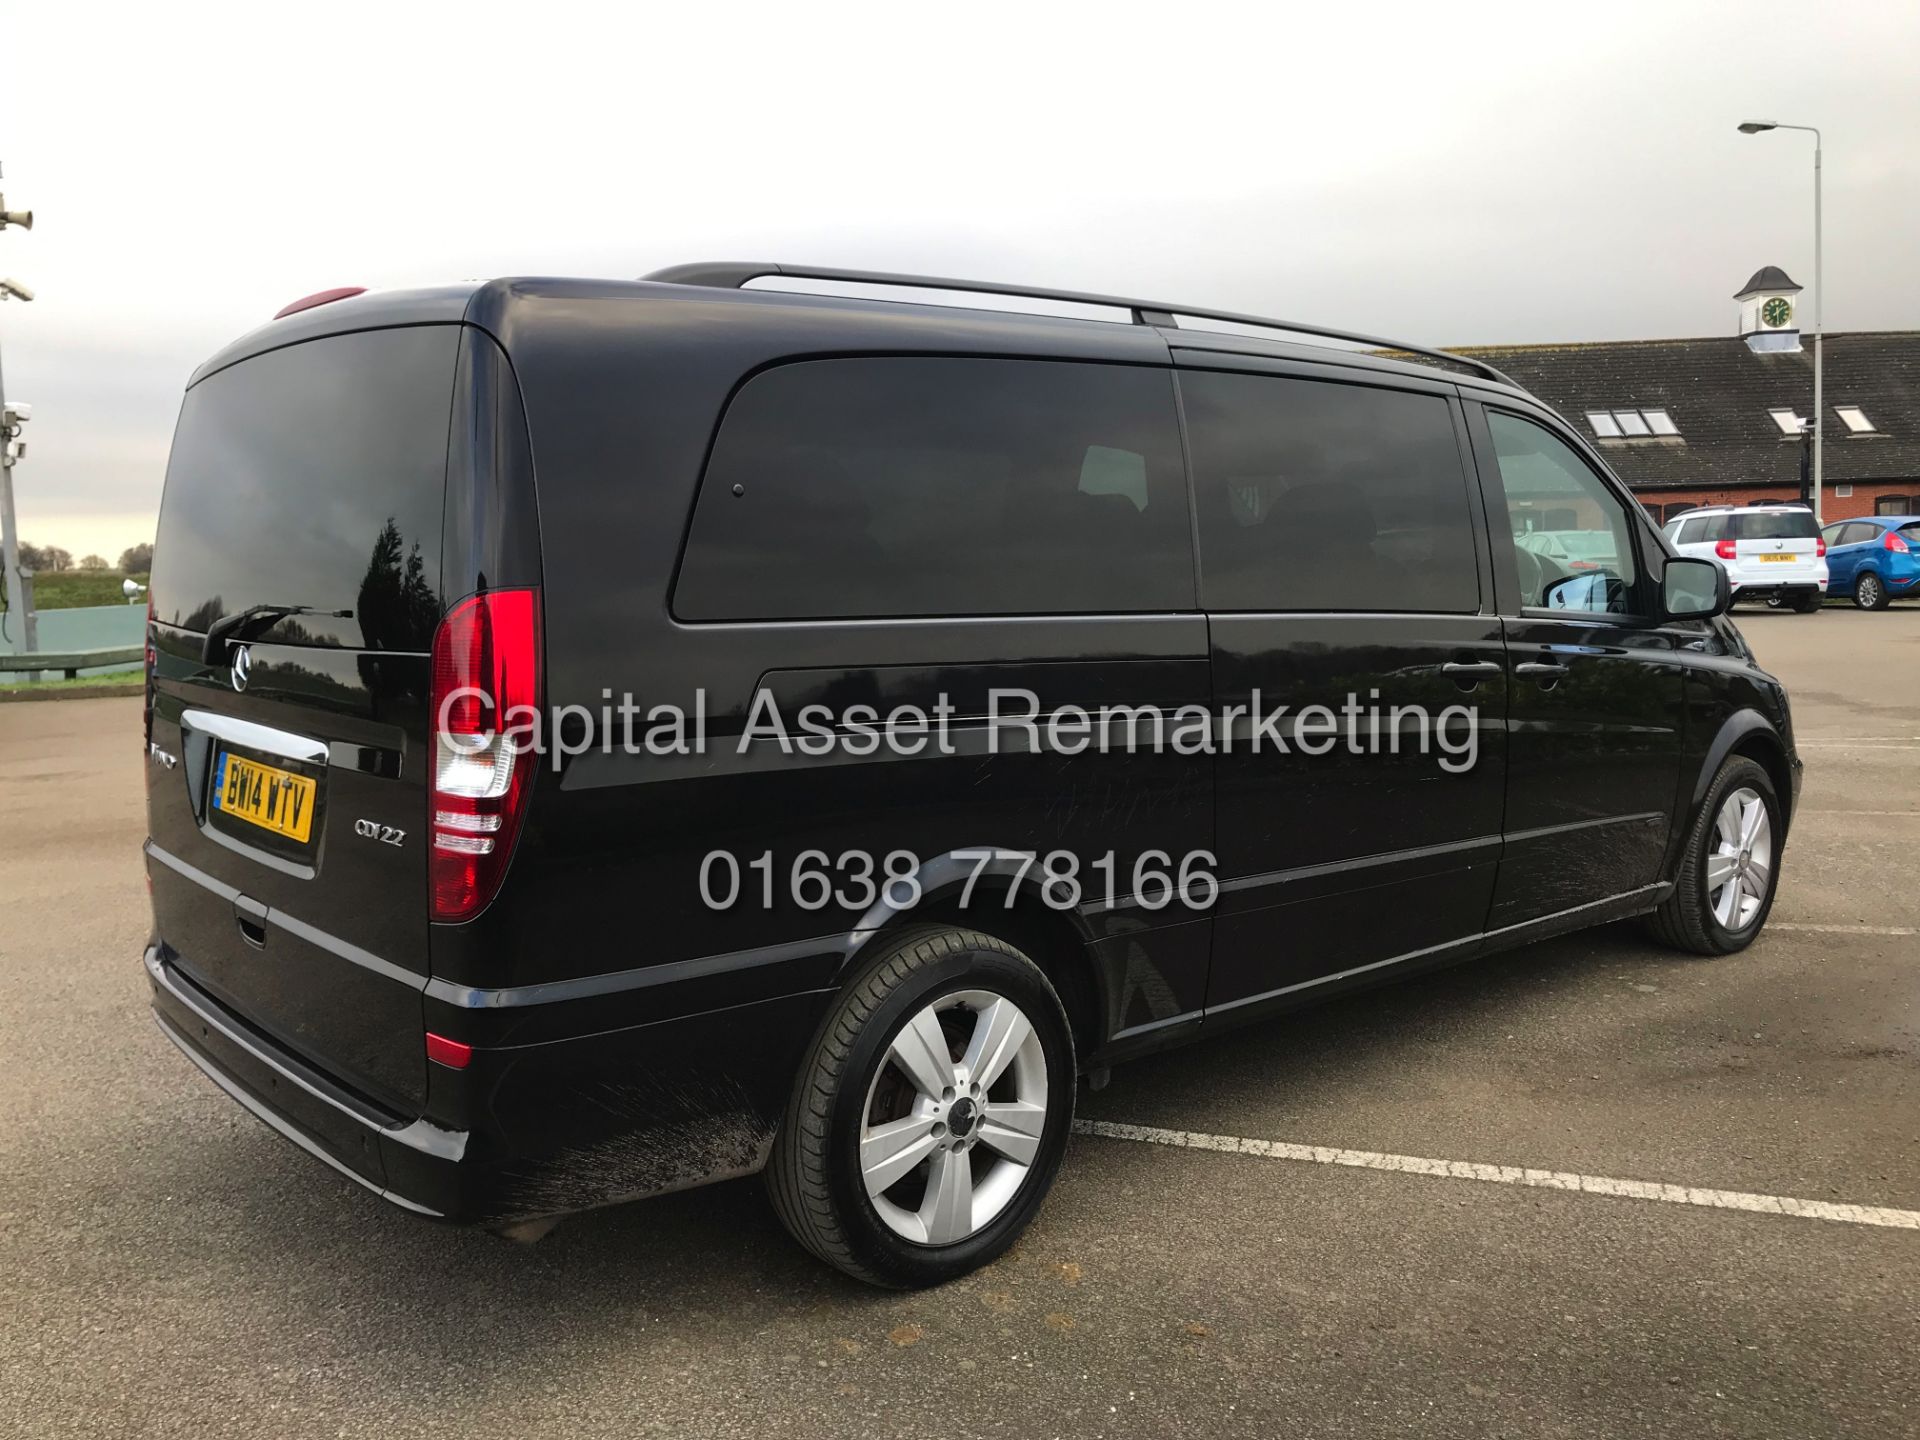 (ON SALE) MERCEDES VIANO 2.2CDI "AMBIENET" XLWB 8 SEATER (14 REG) 1 OWNER - FULLY LOADED - LEATHER - Image 5 of 28